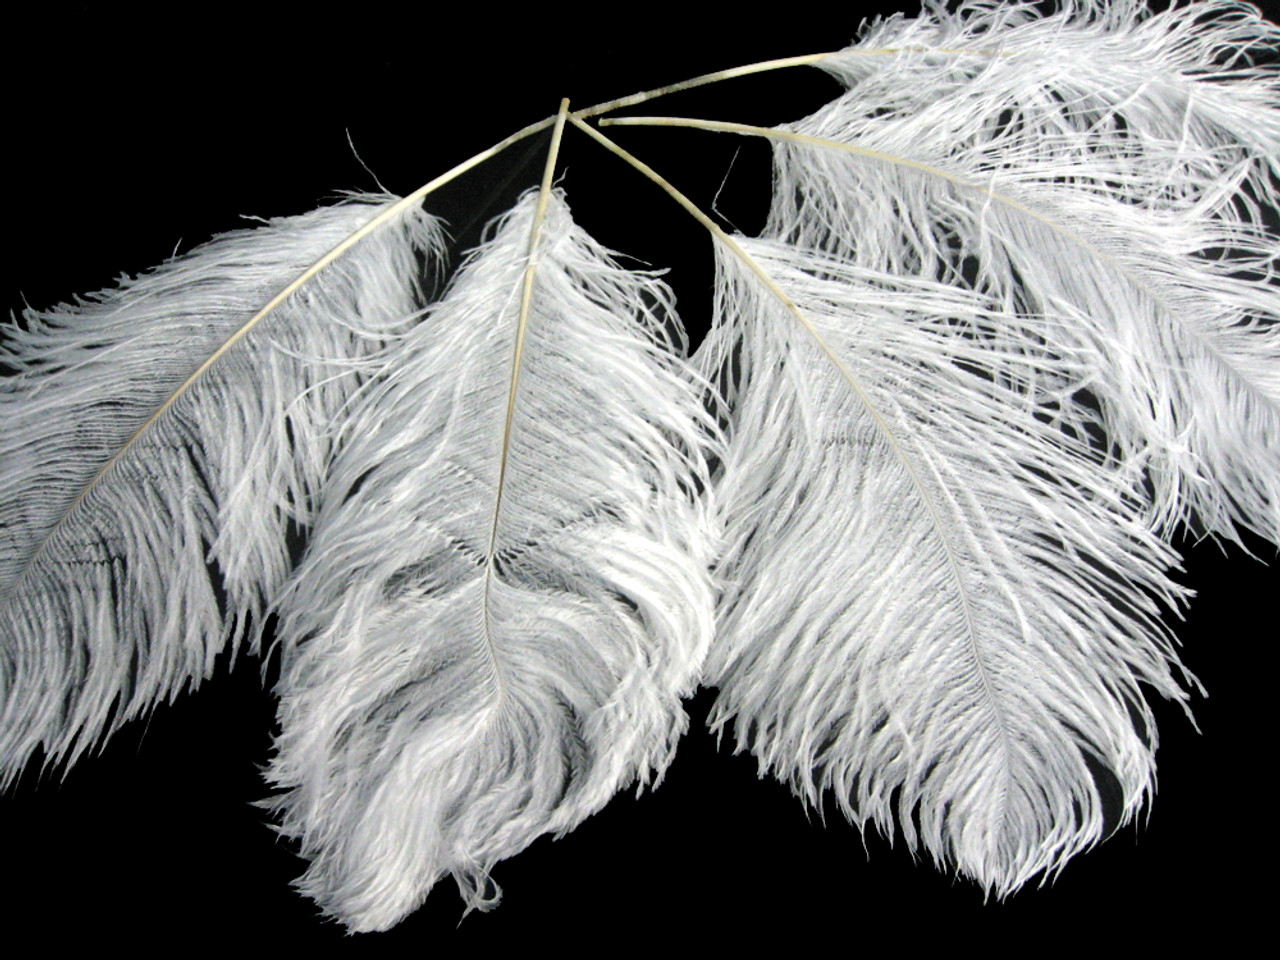 10 Pieces Black Ostrich Tail Large Feathers Centerpiece Halloween Costume  12-16